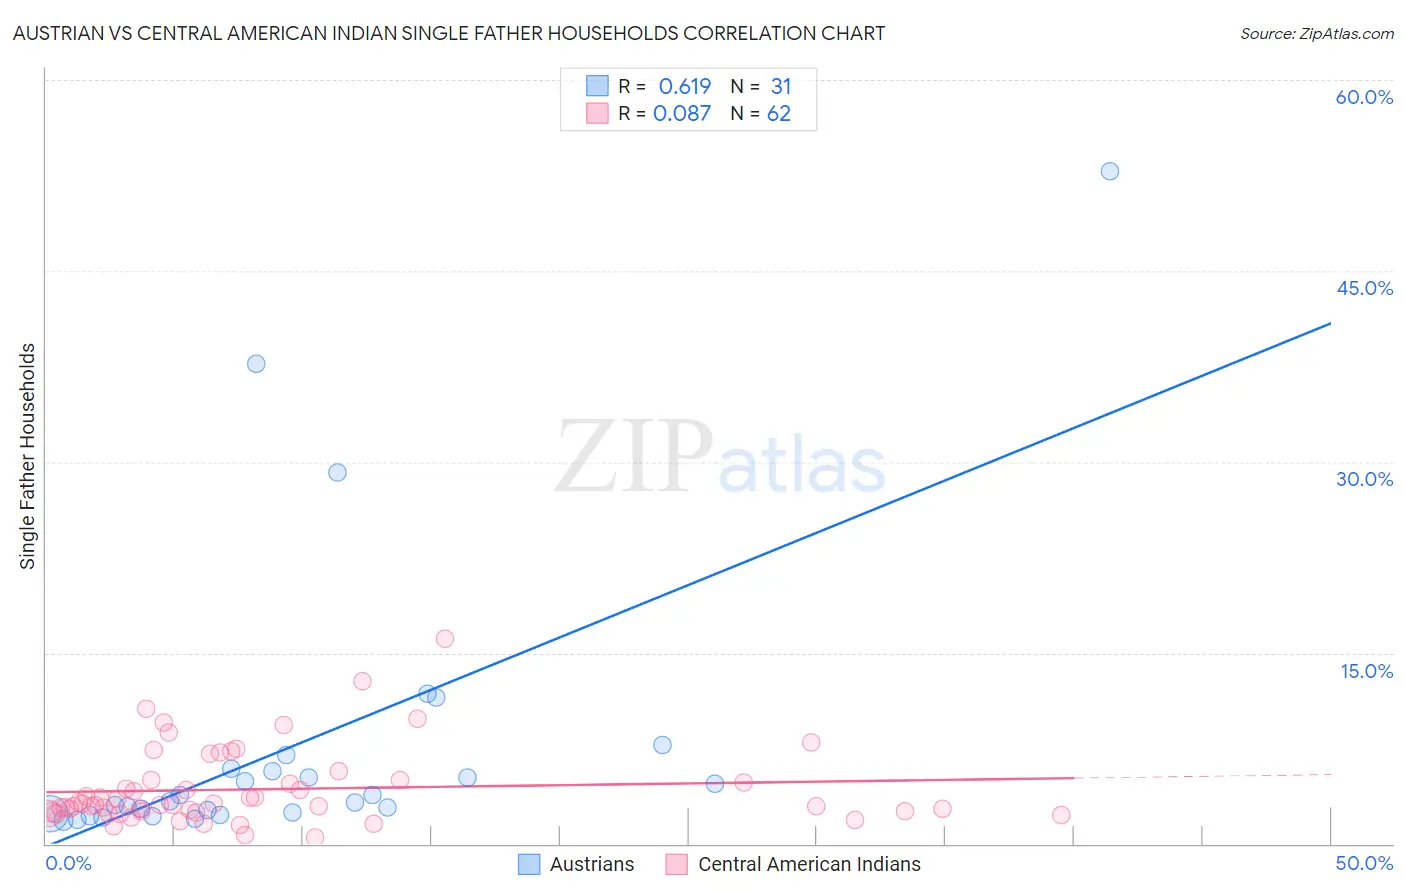 Austrian vs Central American Indian Single Father Households